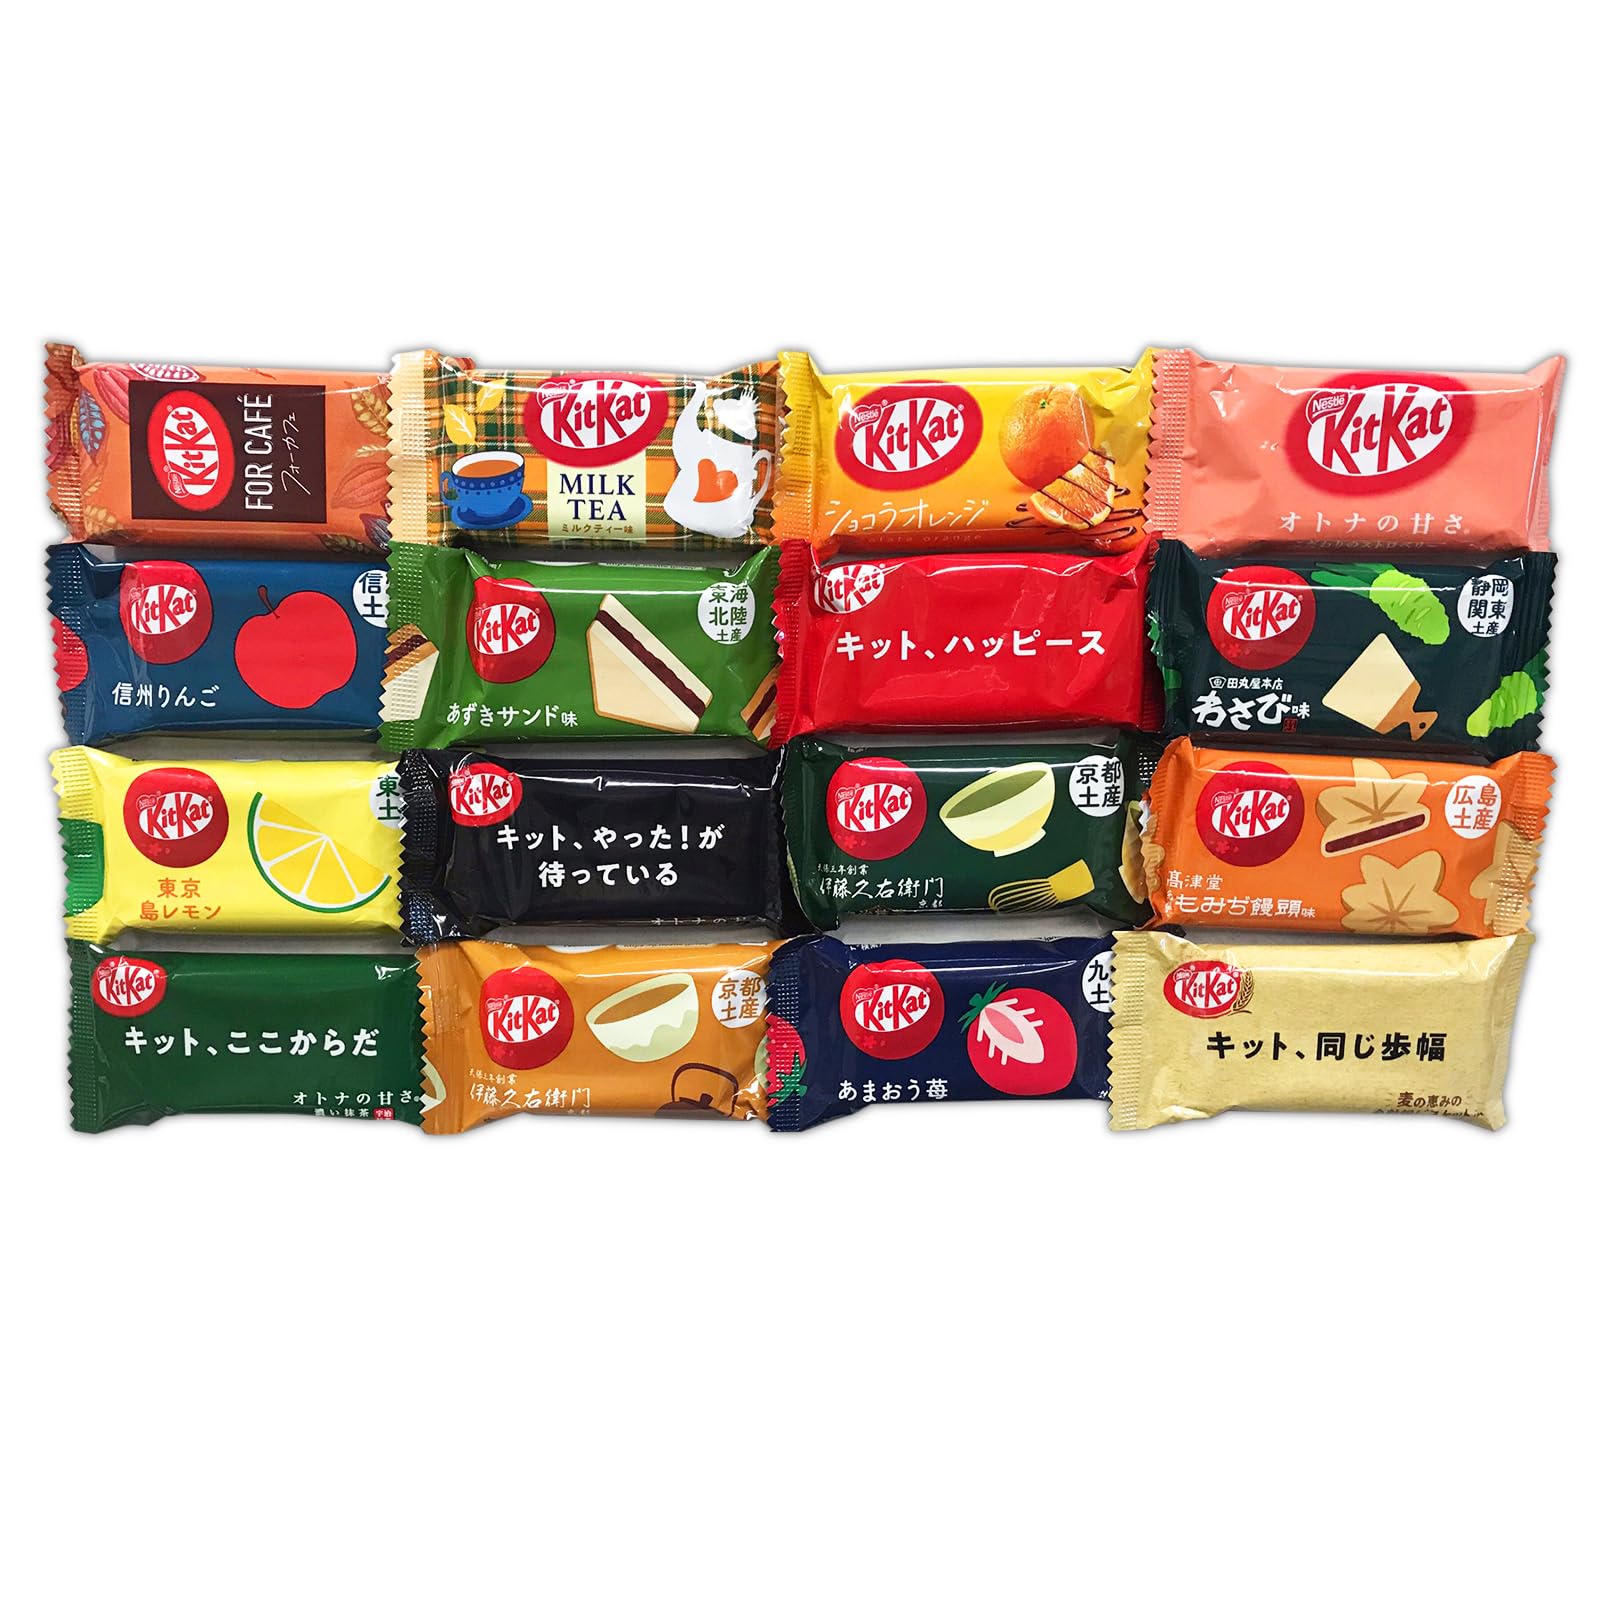 Japanese Kit Kat 14 Pieces VARIETY BUNDLE | 14 Different Flavors, No Repeats | Free Rose Design Gift Box Included | Ships Fast from USA